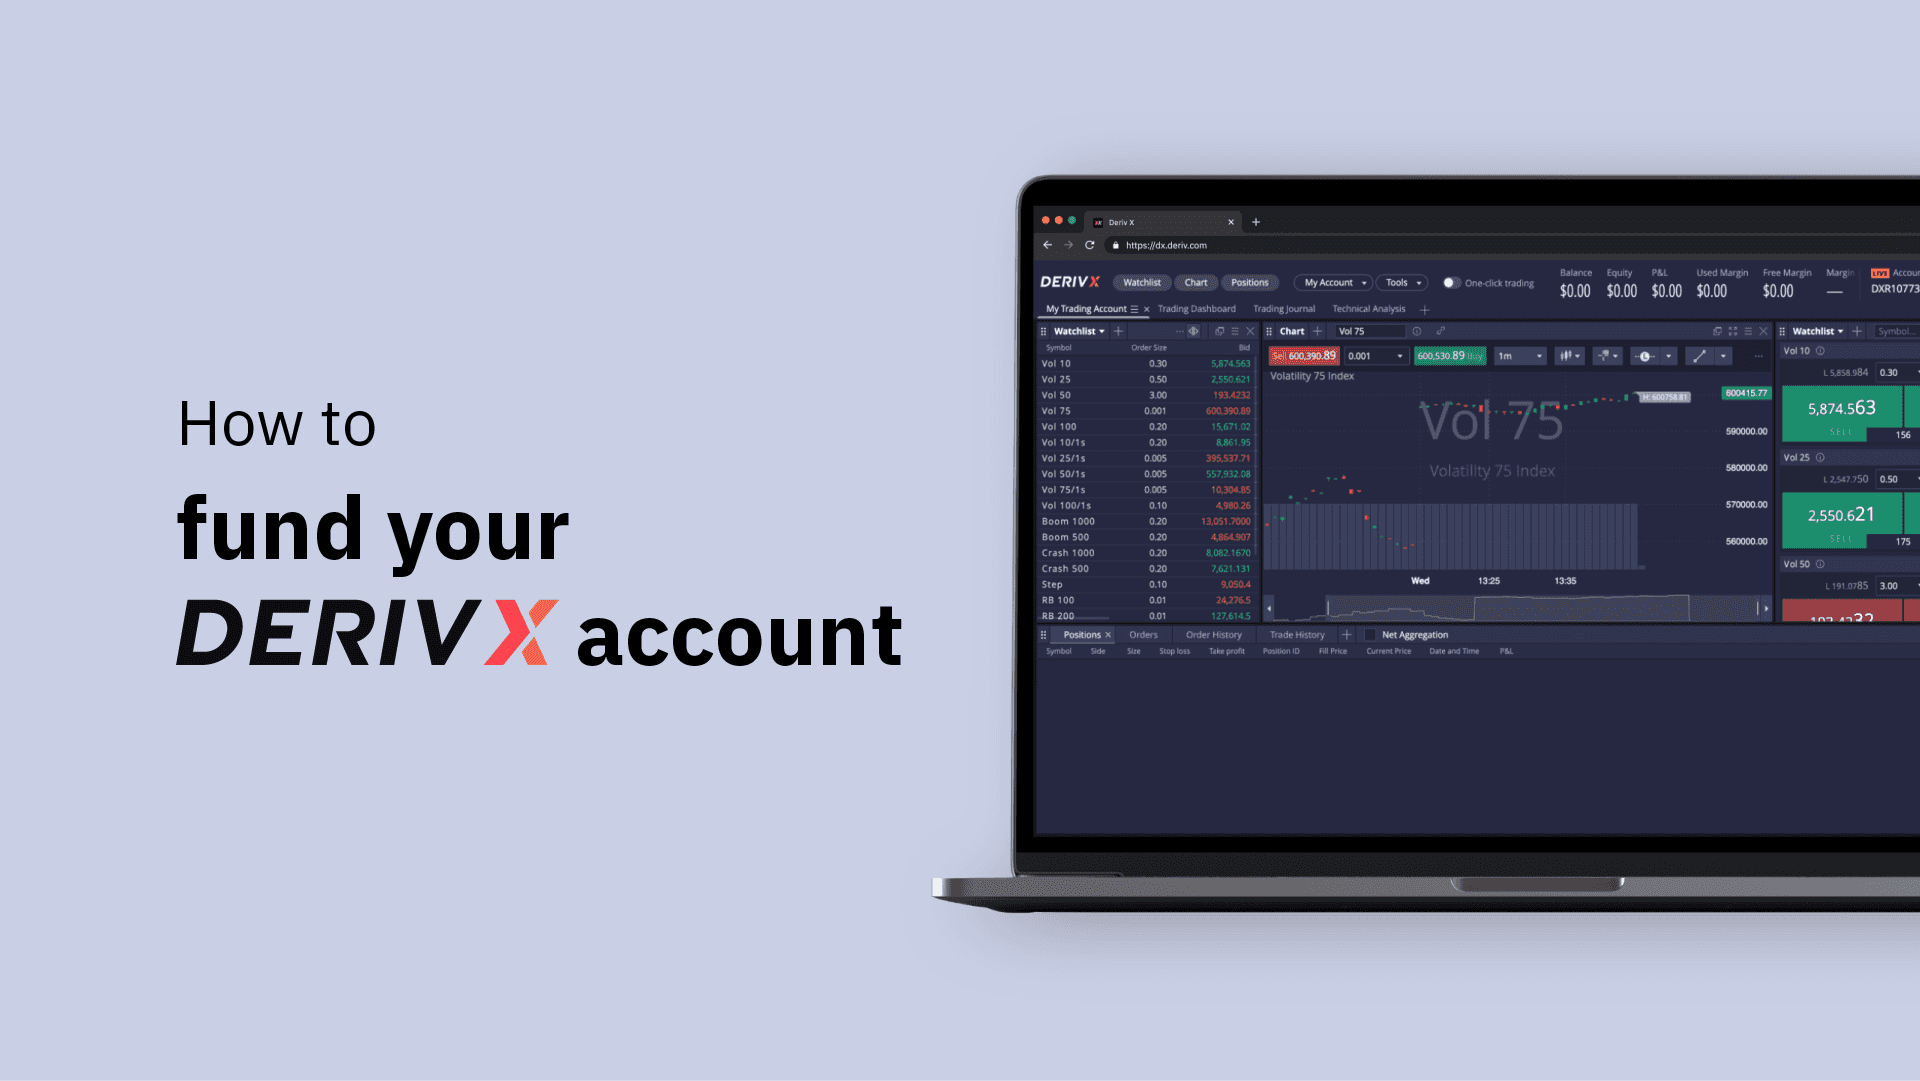 Find out how you can fund your Deriv X account to start trading and withdraw your funds out of it in a few simple steps.